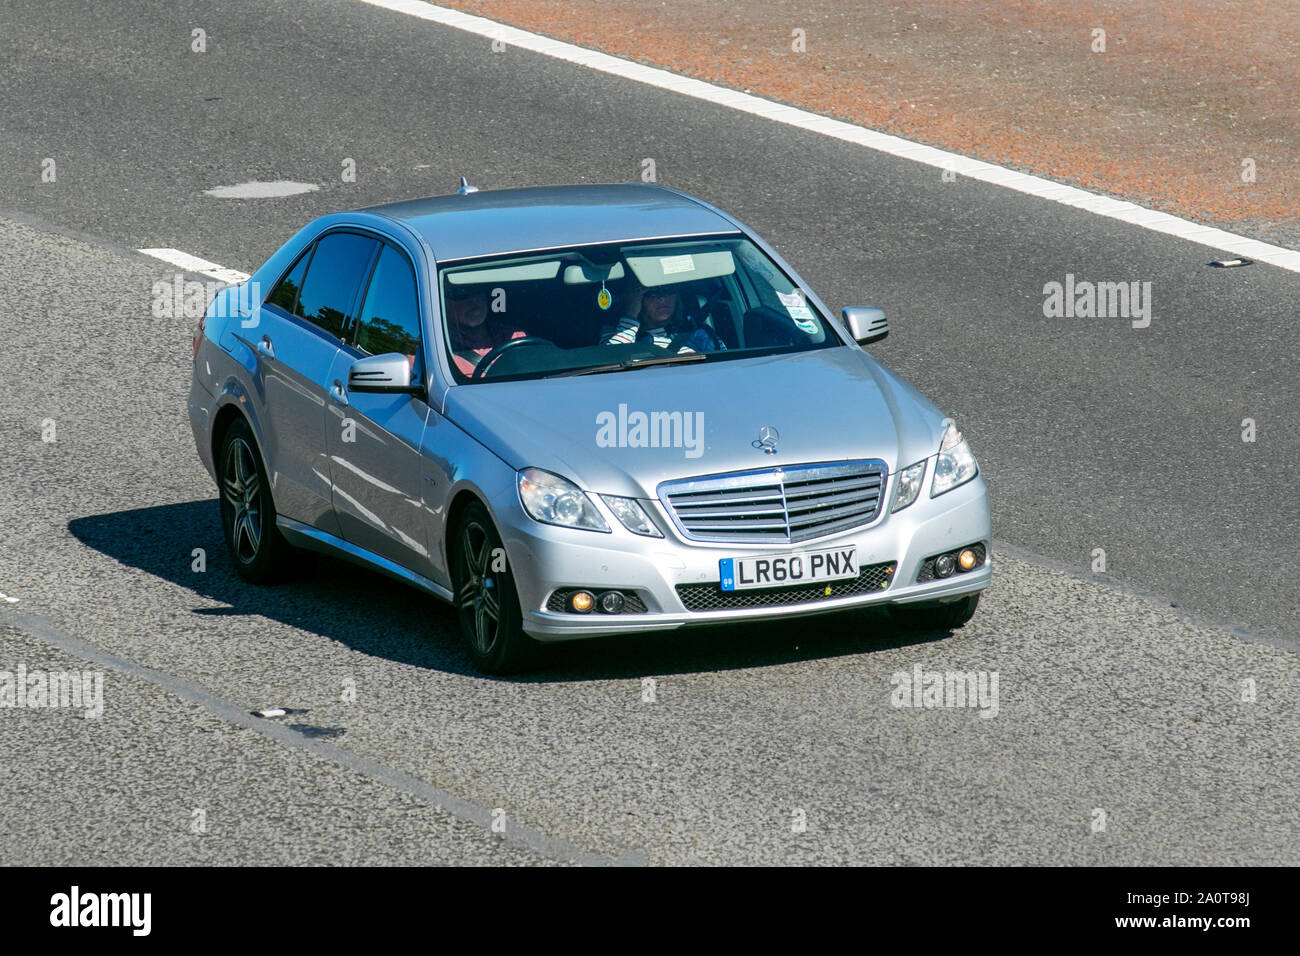 2010 silver Mercedes-Benz E200 Blue-Cy SE CDI A; UK Vehicular traffic,  transport, modern, saloon cars, south-bound on the 3 lane M6 motorway  highway Stock Photo - Alamy